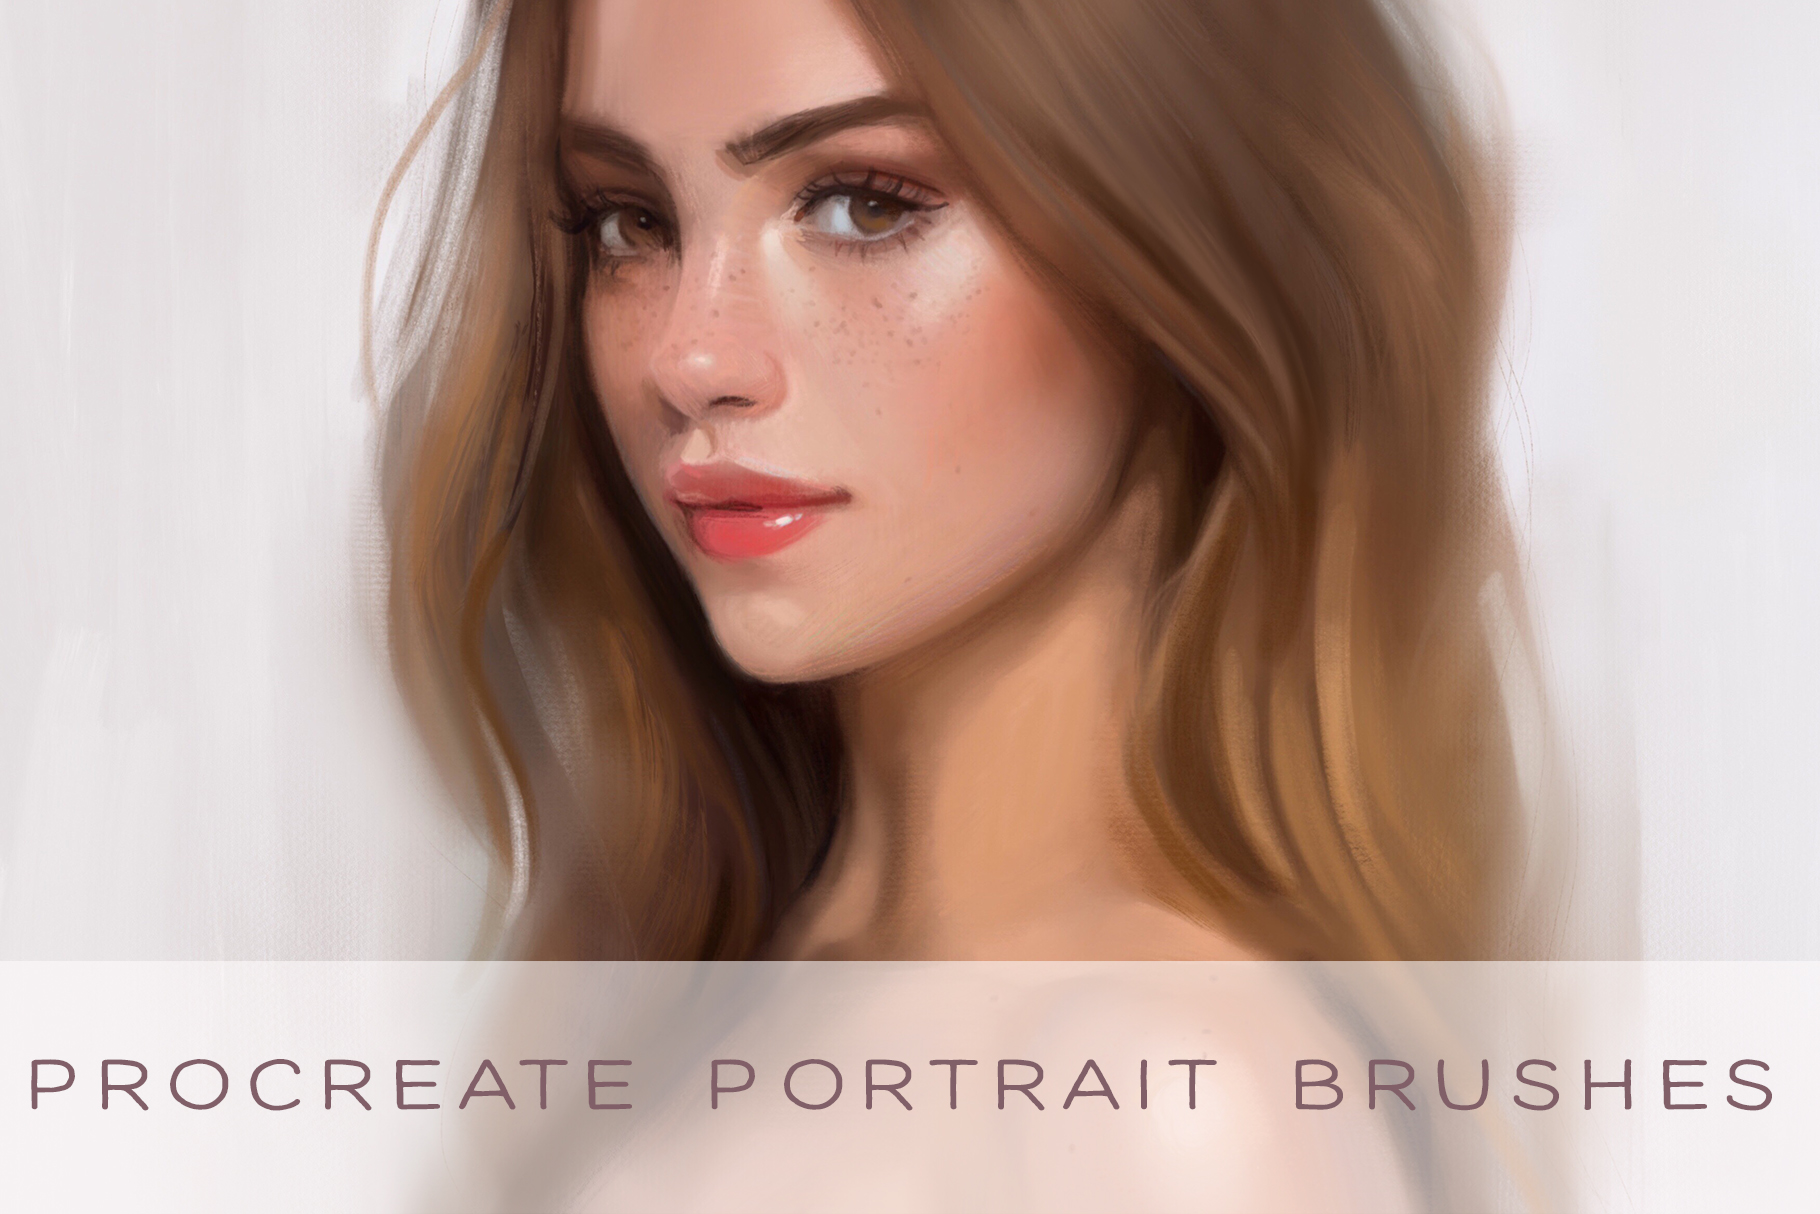 portrait brushes procreate free download